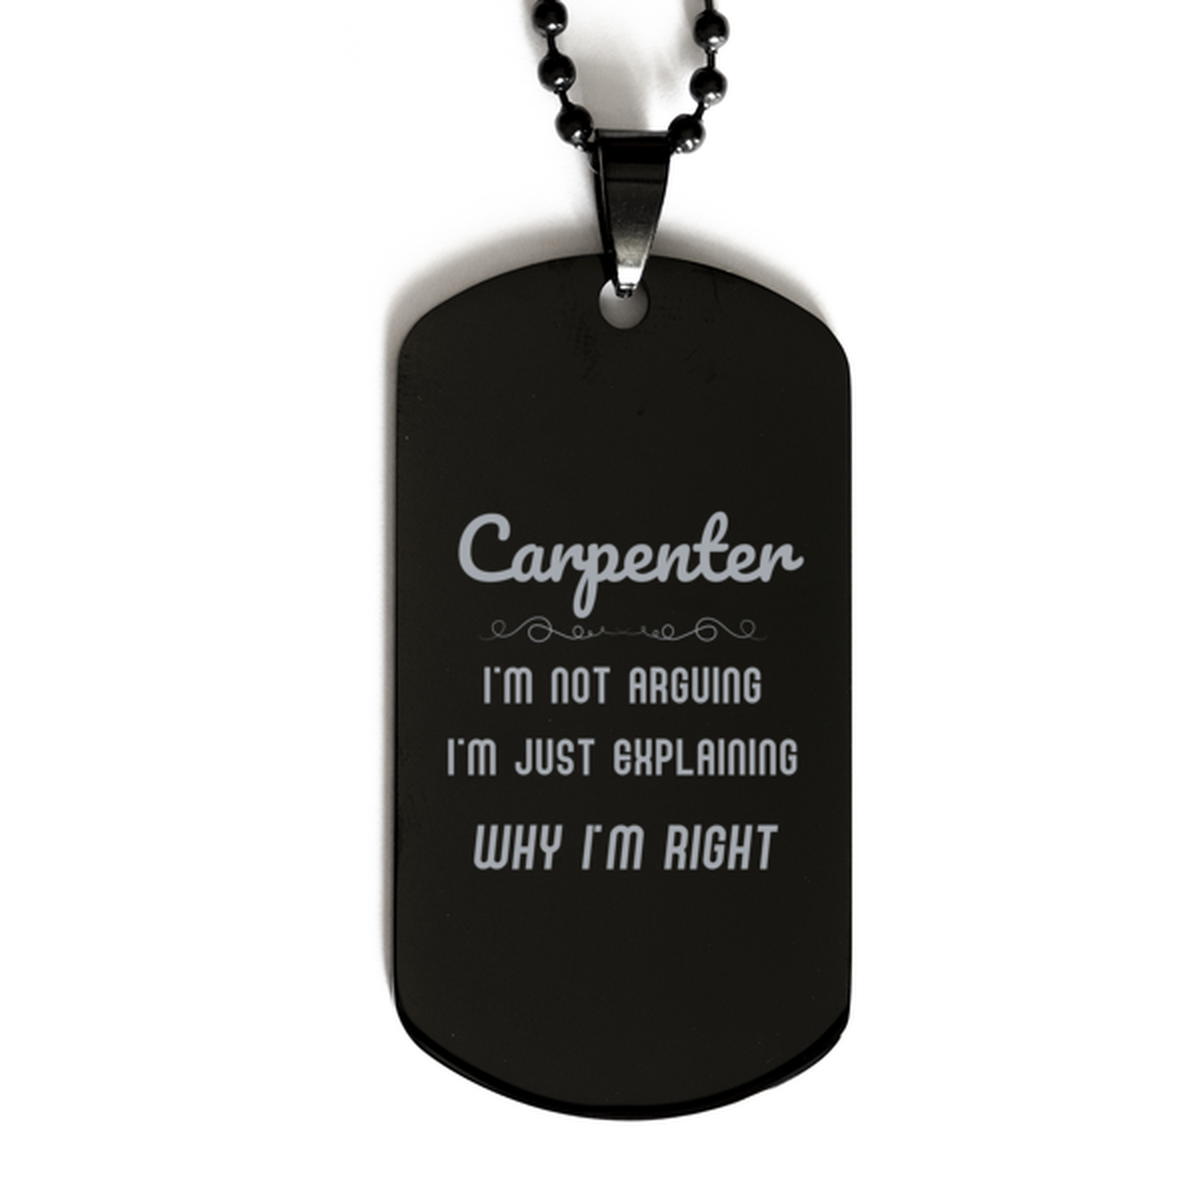 Carpenter I'm not Arguing. I'm Just Explaining Why I'm RIGHT Black Dog Tag, Funny Saying Quote Carpenter Gifts For Carpenter Graduation Birthday Christmas Gifts for Men Women Coworker